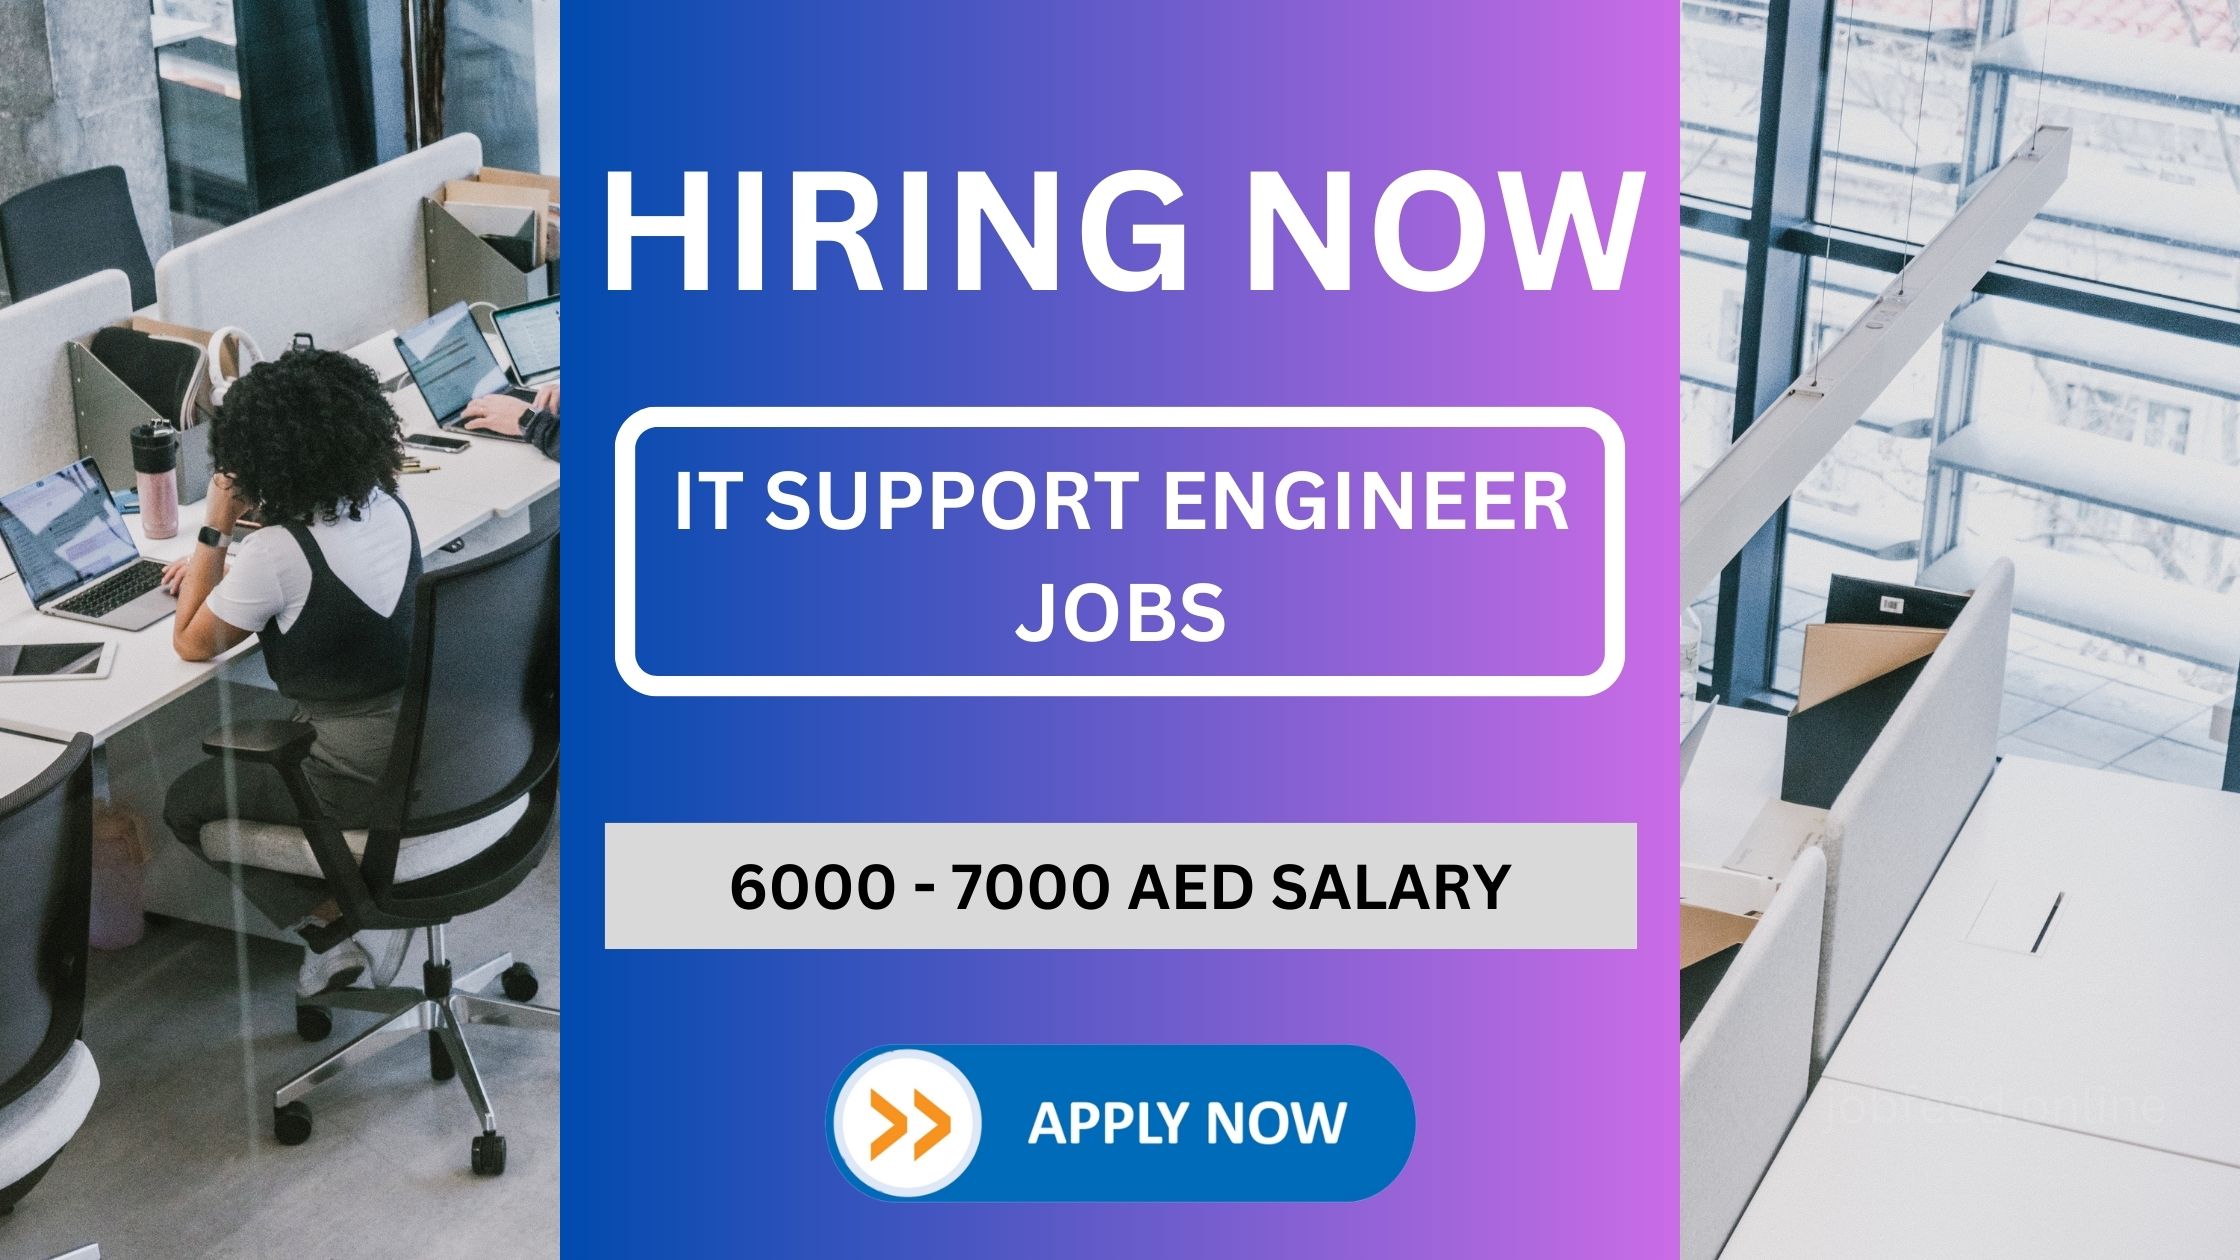 IT Support Engineer Jobs in Abu Dhabi: Boost Your Career in the IT Industry